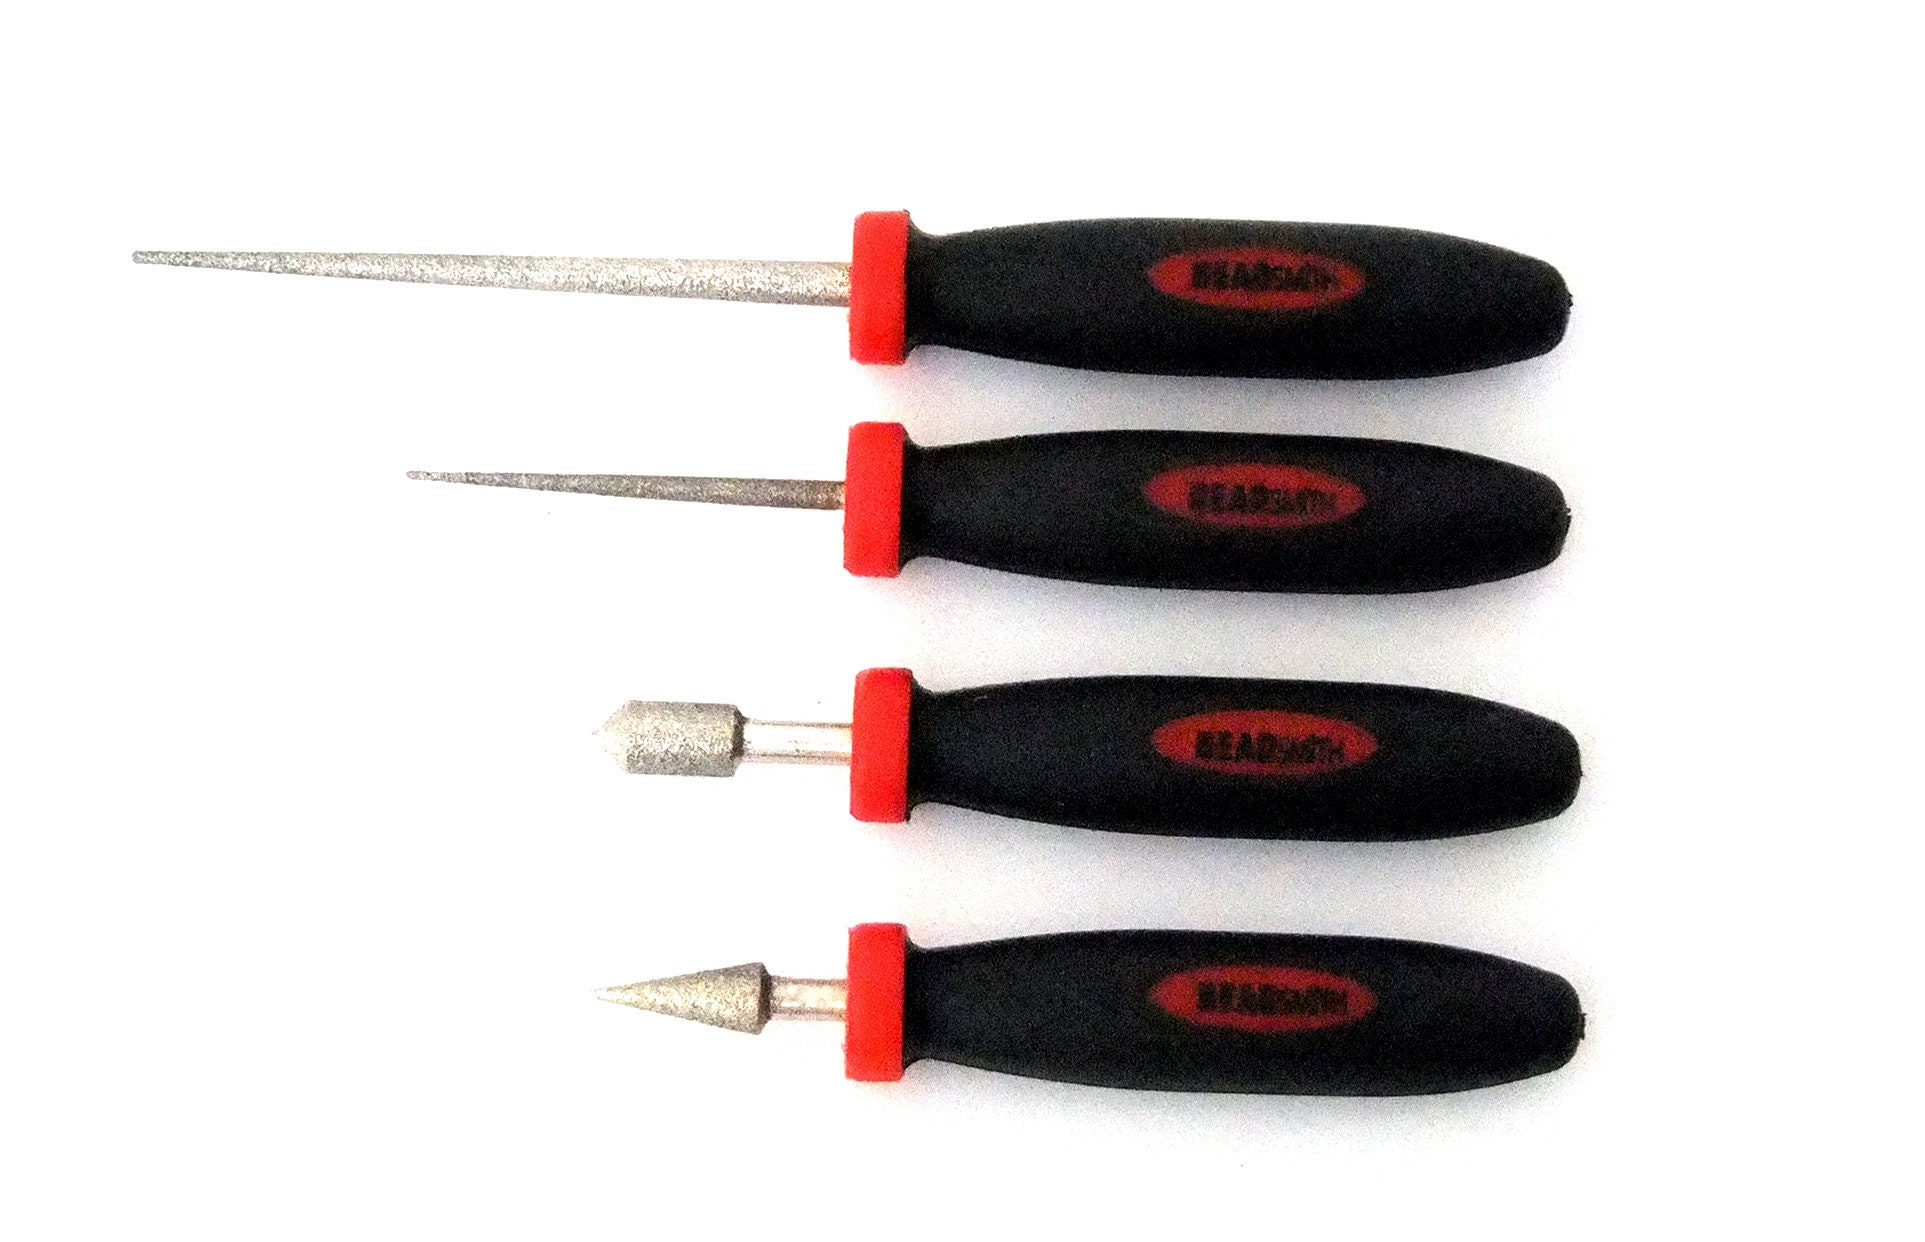  Pro-Electric Bead Reamer Jewelry Making Bead Enlarging Hole Maker  Tool Set : Arts, Crafts & Sewing